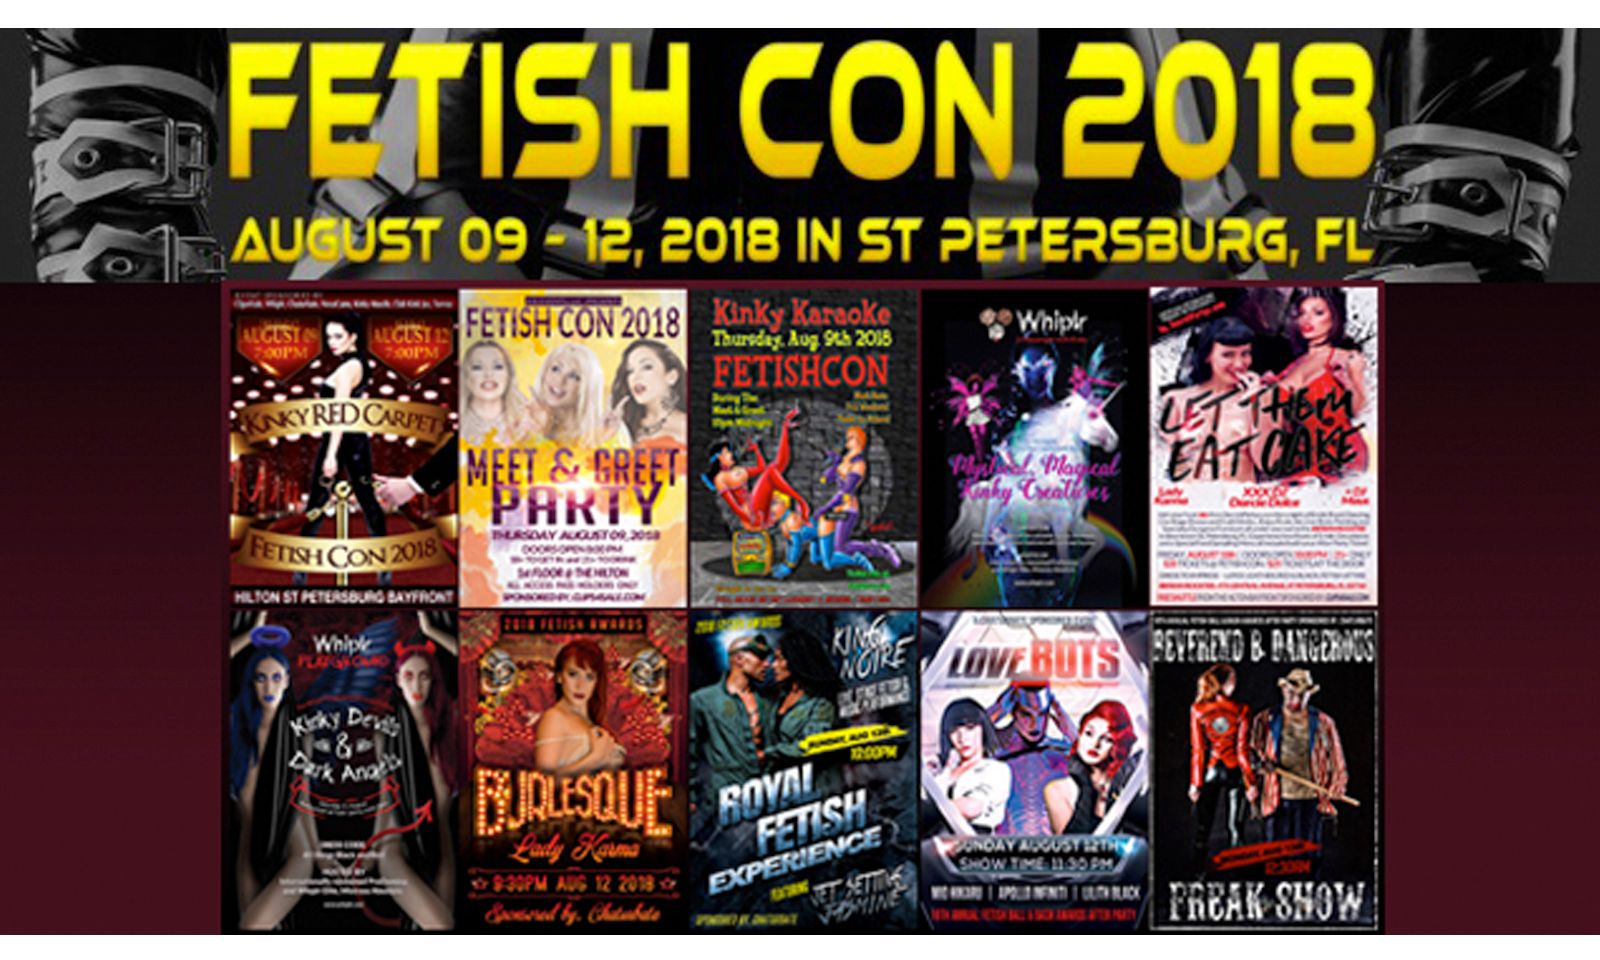 Official Party Schedule Announced For Fetish Con